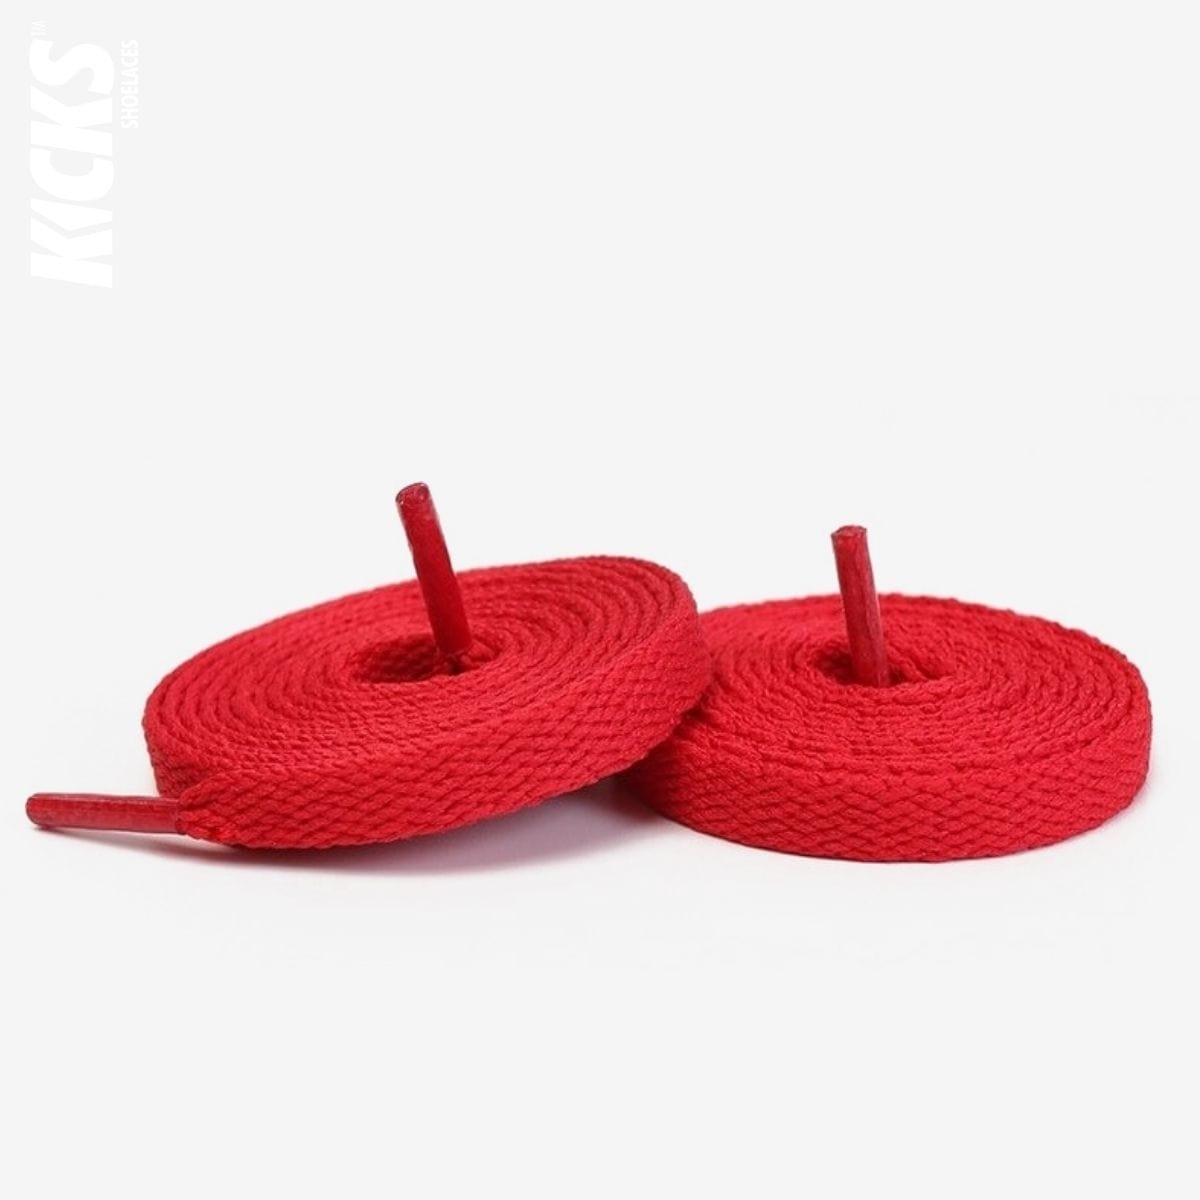 red-fun-shoelaces-suitable-for-tying shoelaces-on-popular-sneakers